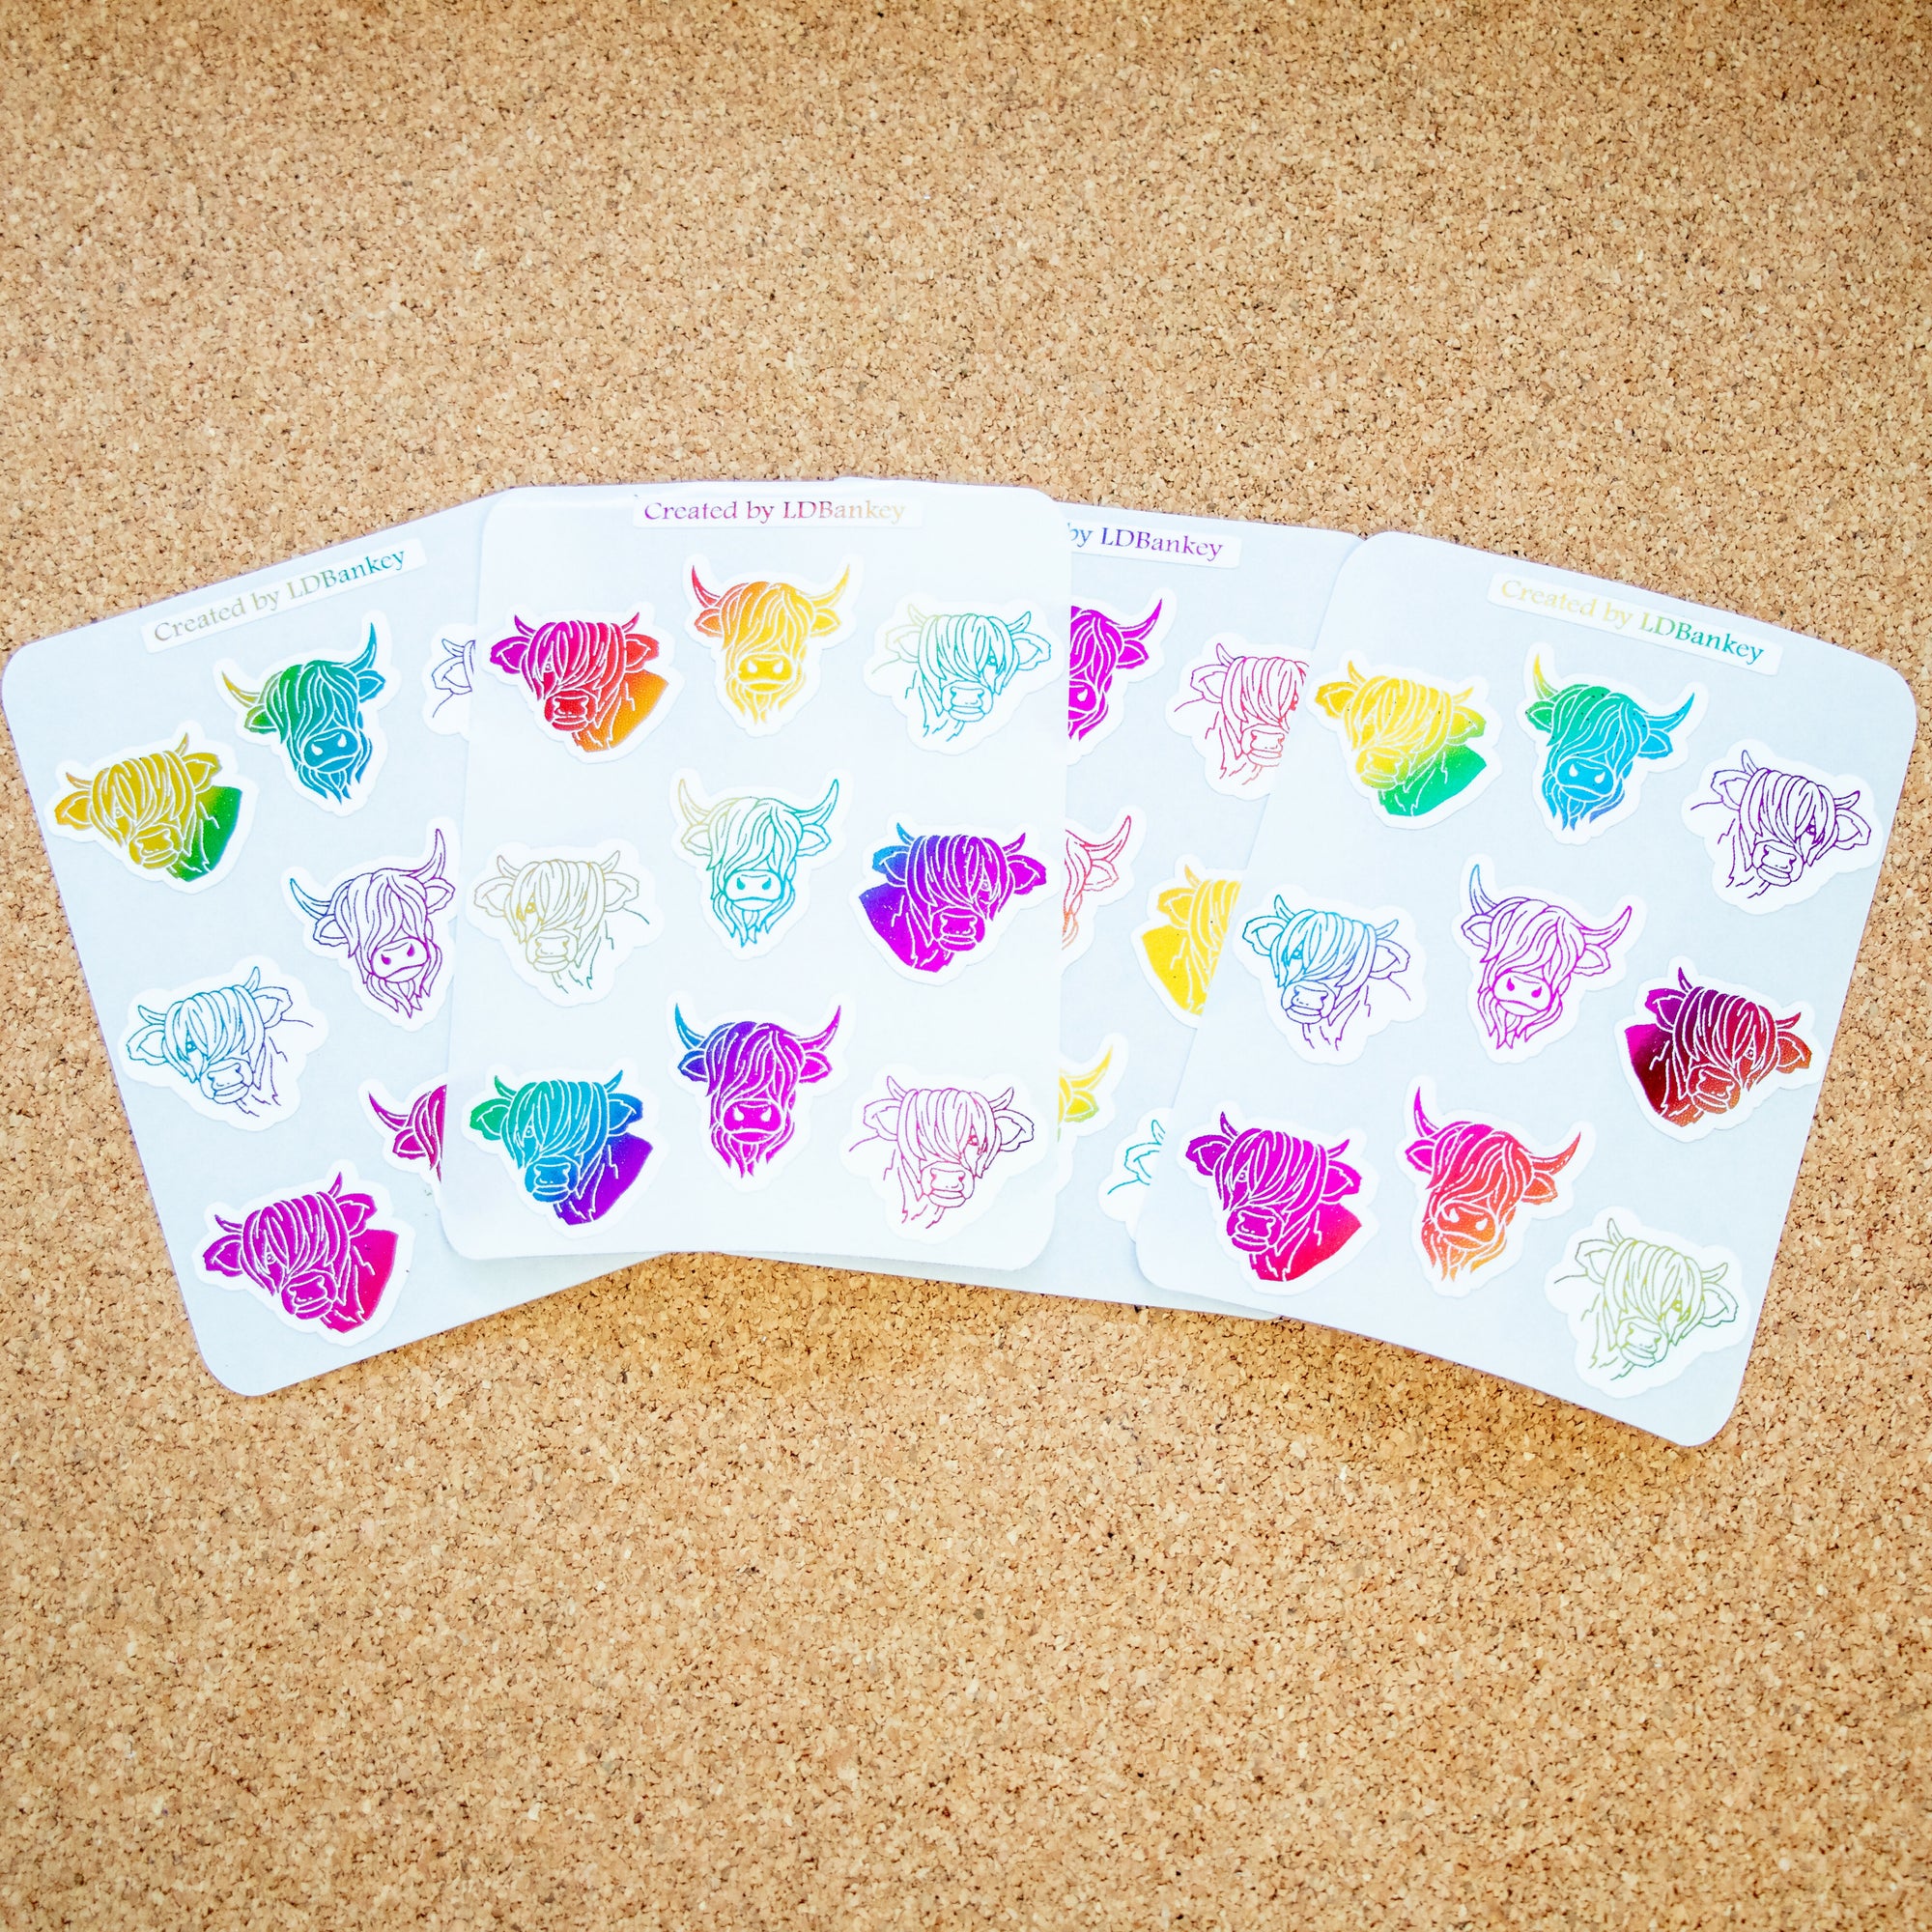 Created by LDBankey | Highland Cow Themed Sticker Sheets